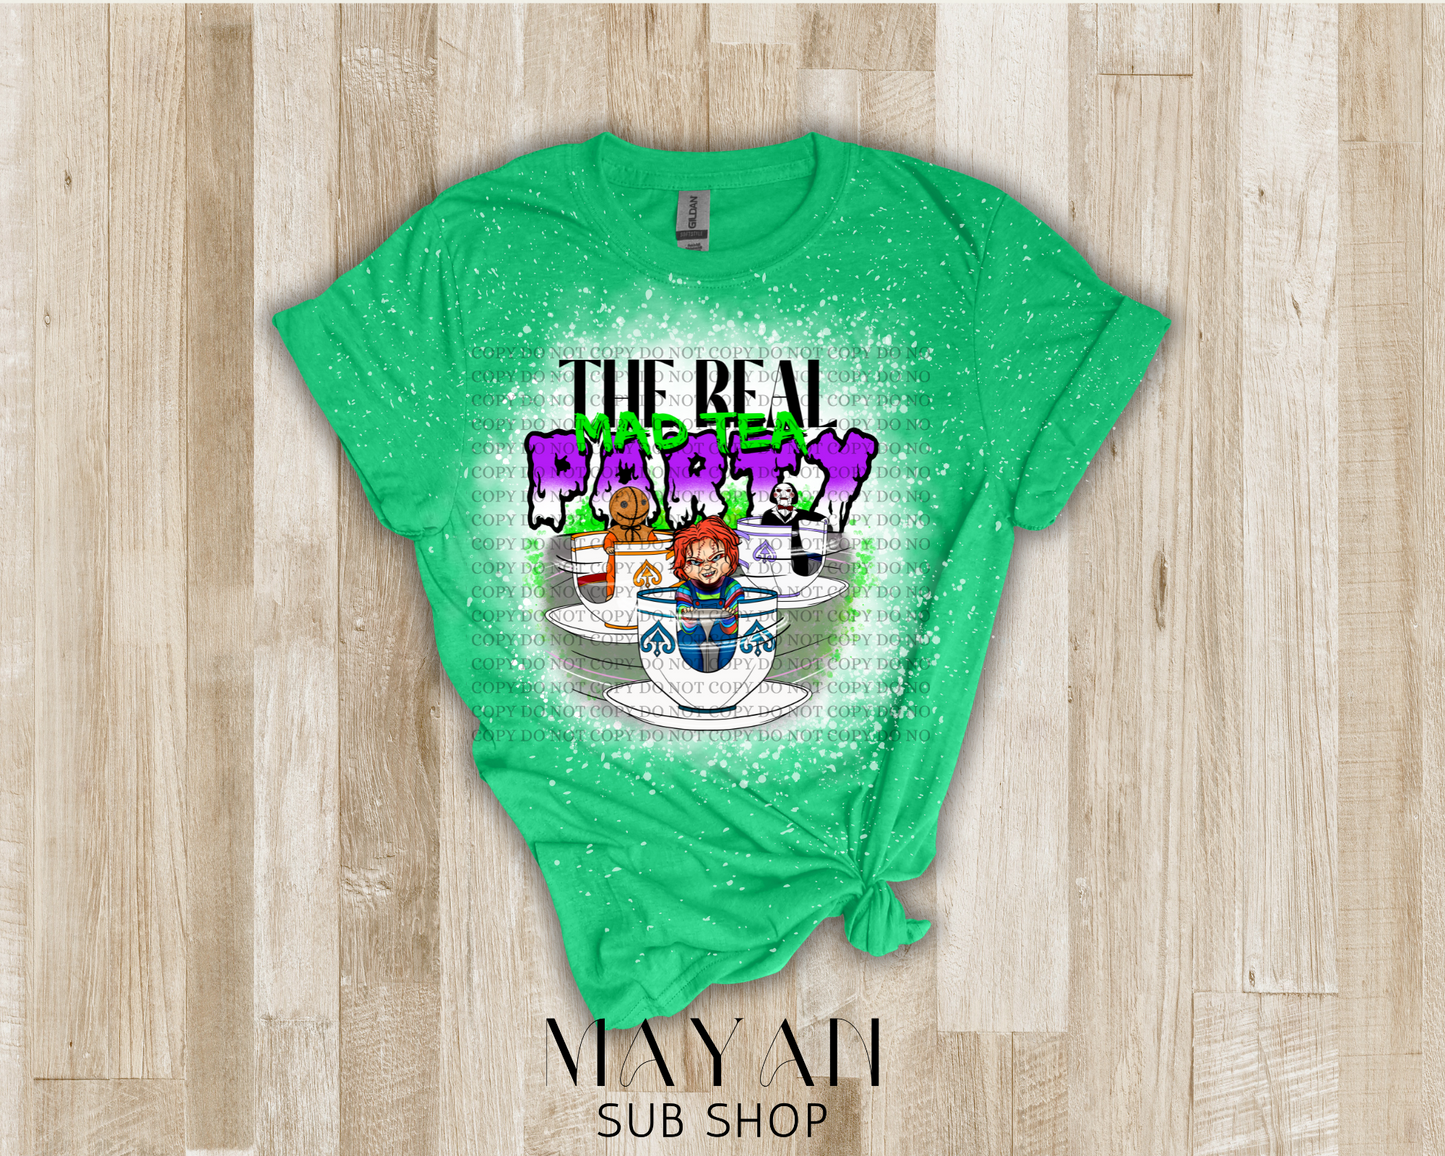 The real mad tea party bleached shirt - Mayan Sub Shop